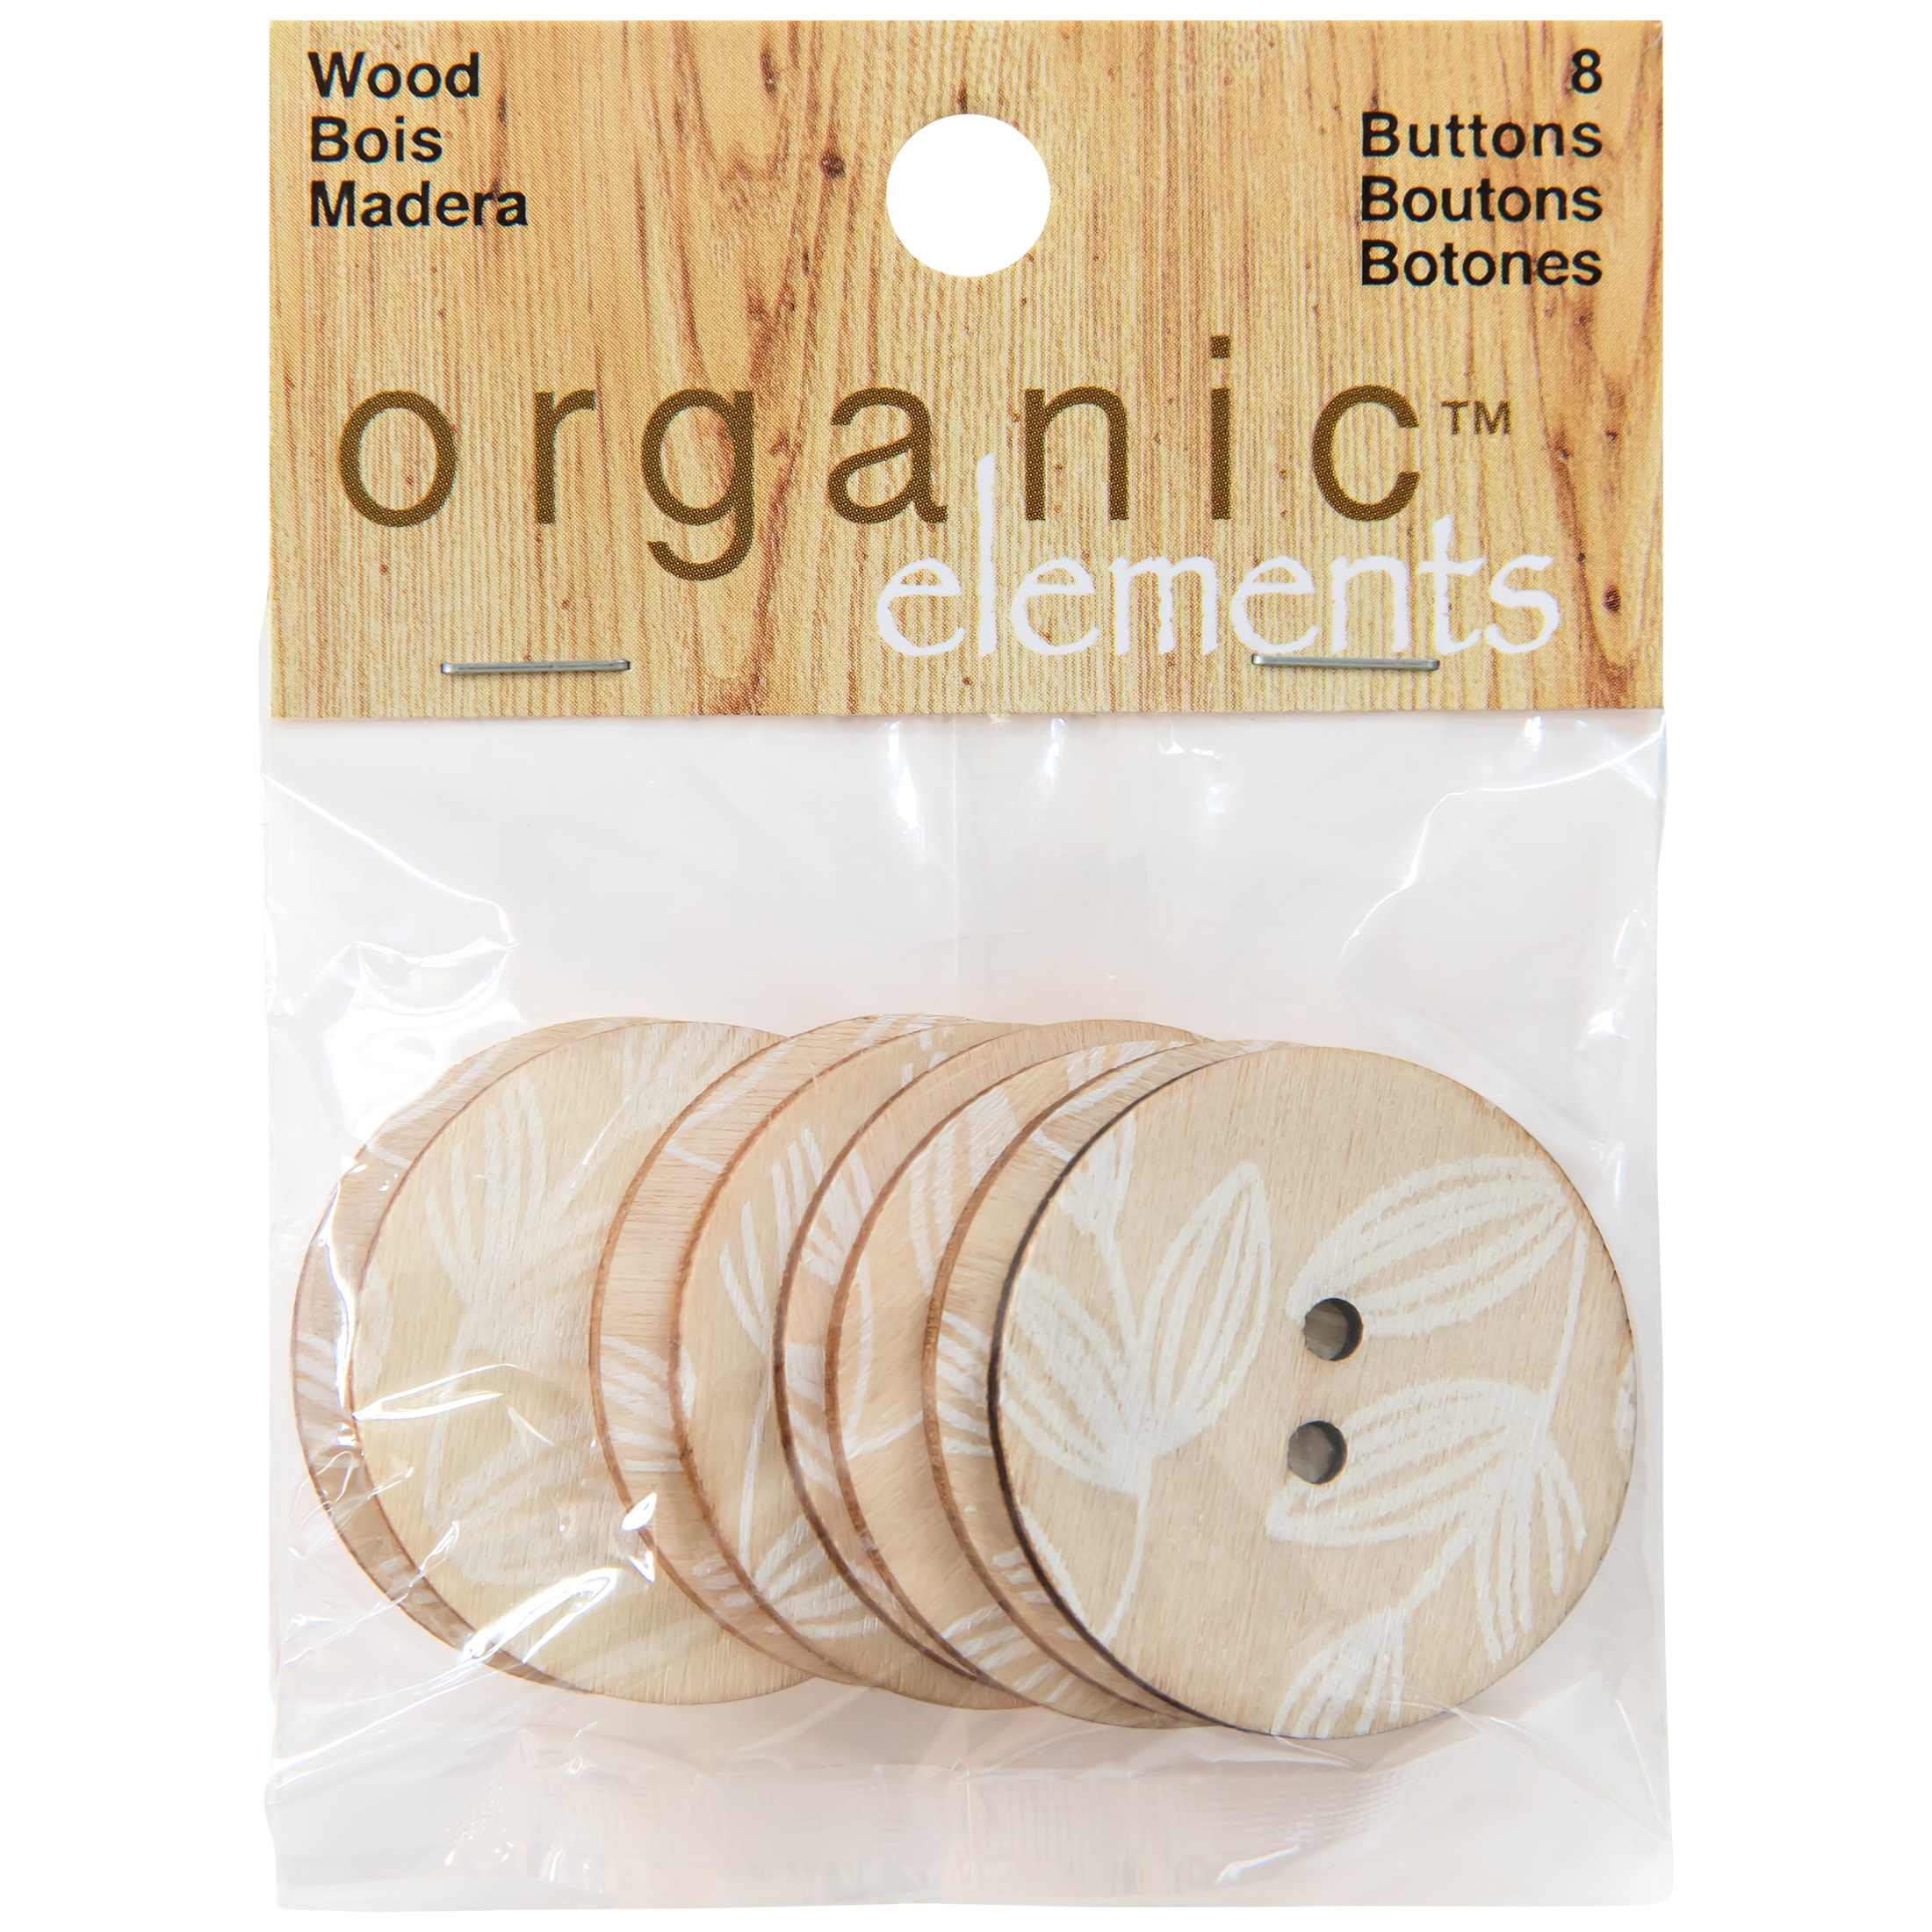 Organic Elements Tan 1 3/8" Wood Floral Printed 2-Hole Buttons, 8 Pieces - image 1 of 6